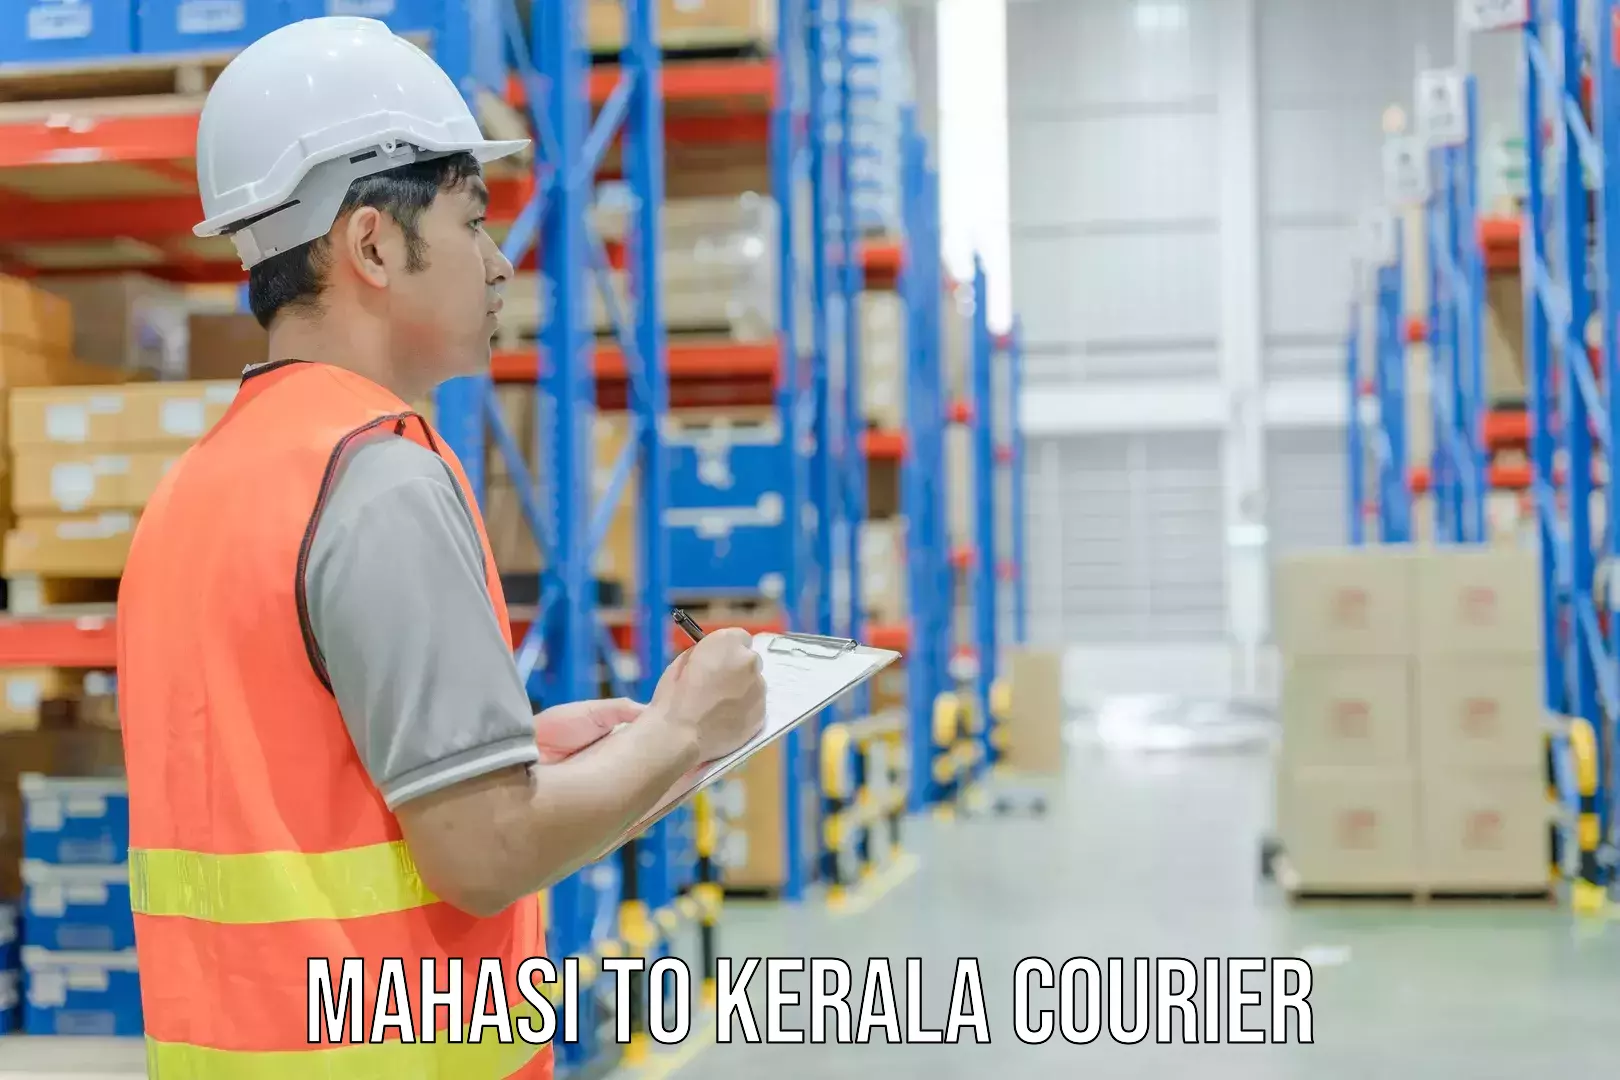 Rural area delivery in Mahasi to Kerala